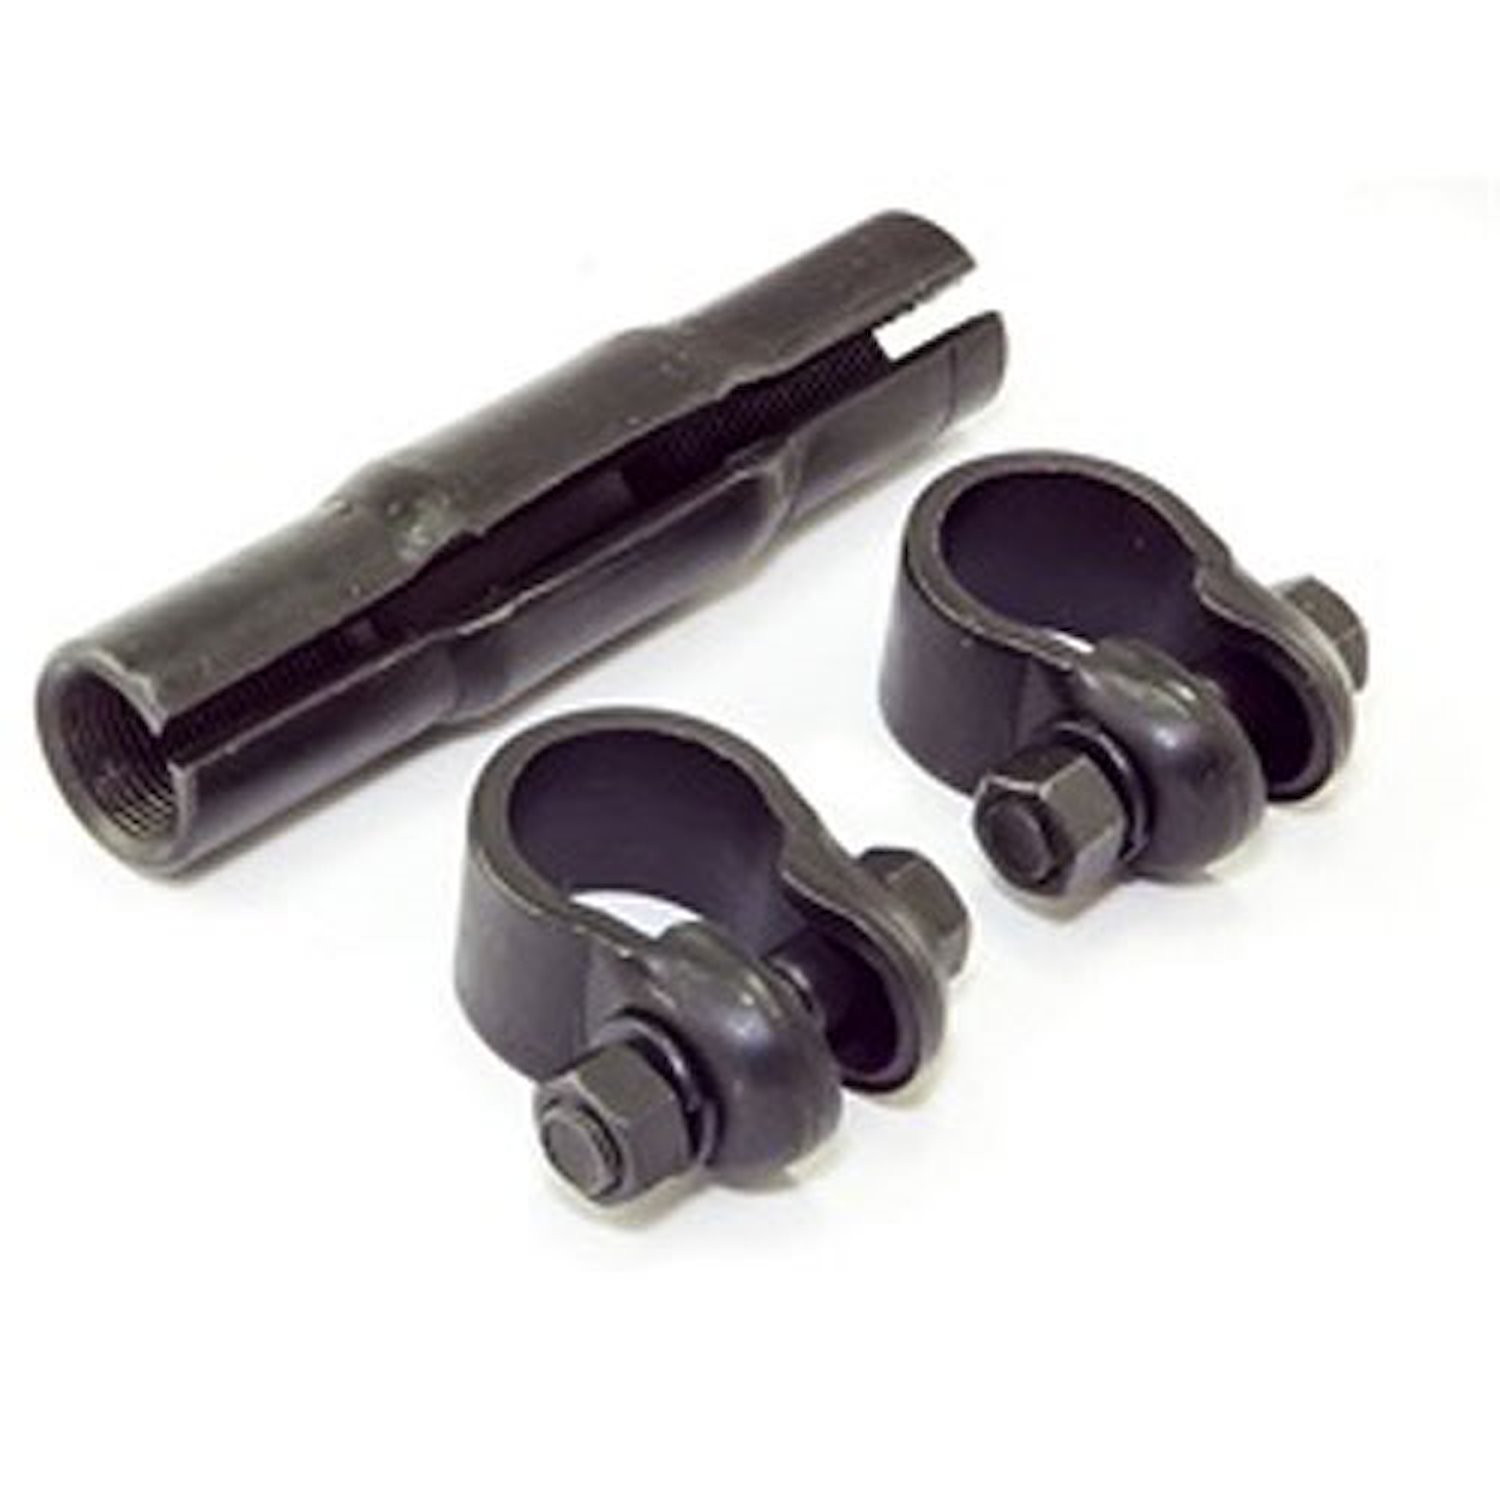 This tie rod adjusting sleeve from Omix-ADA fits 07-16 Jeep Wranglers.